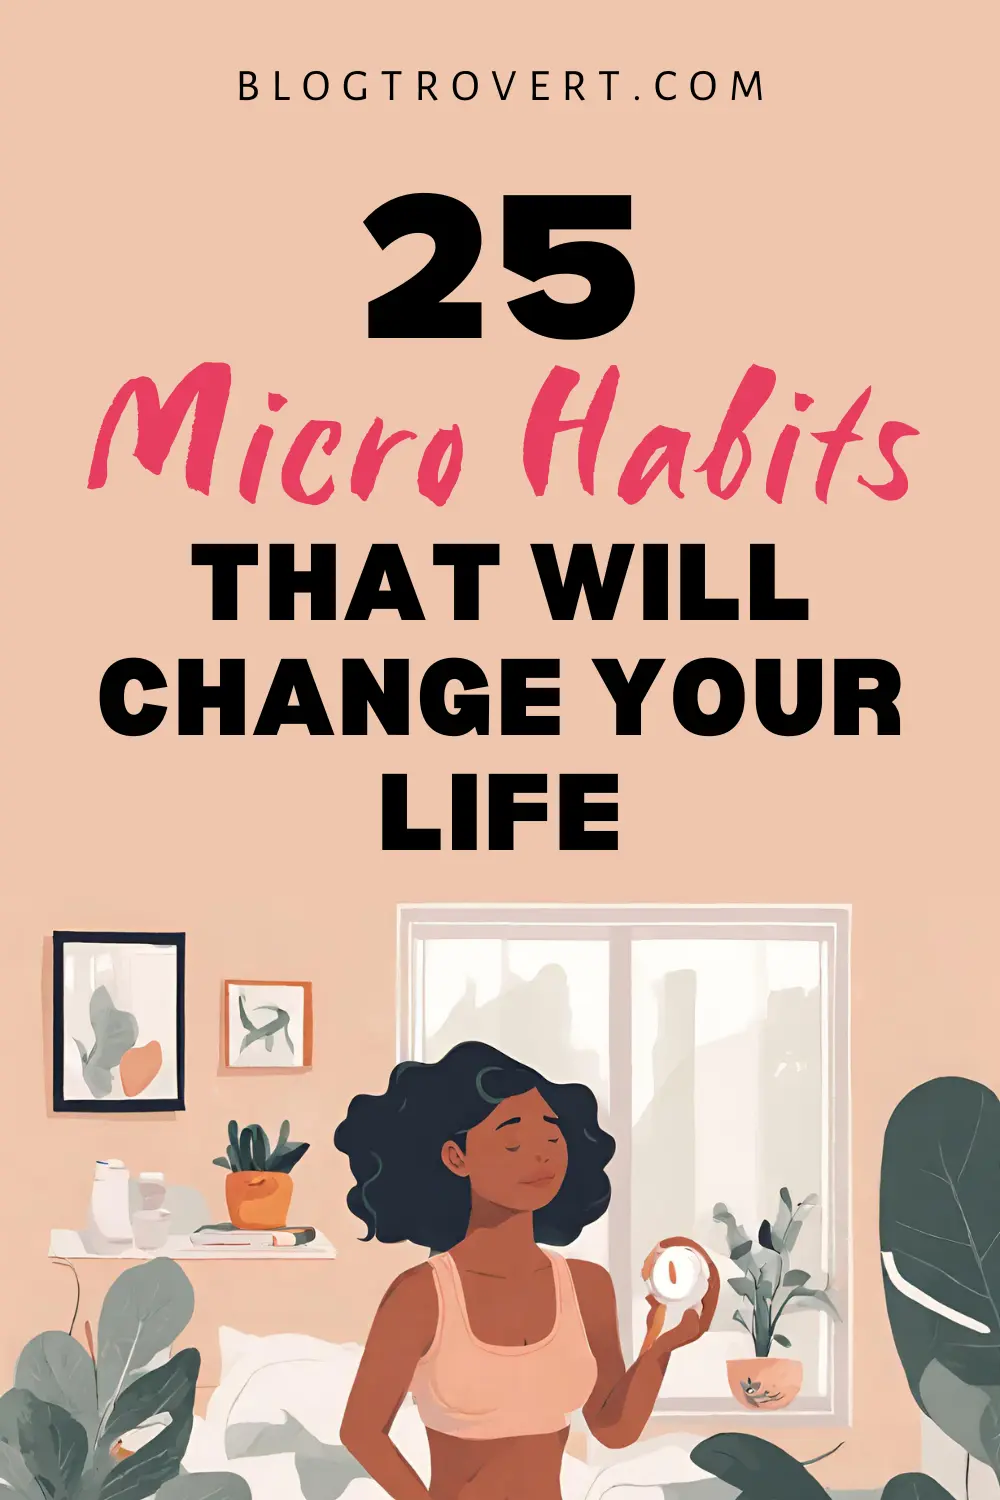 Micro habits that can change your life